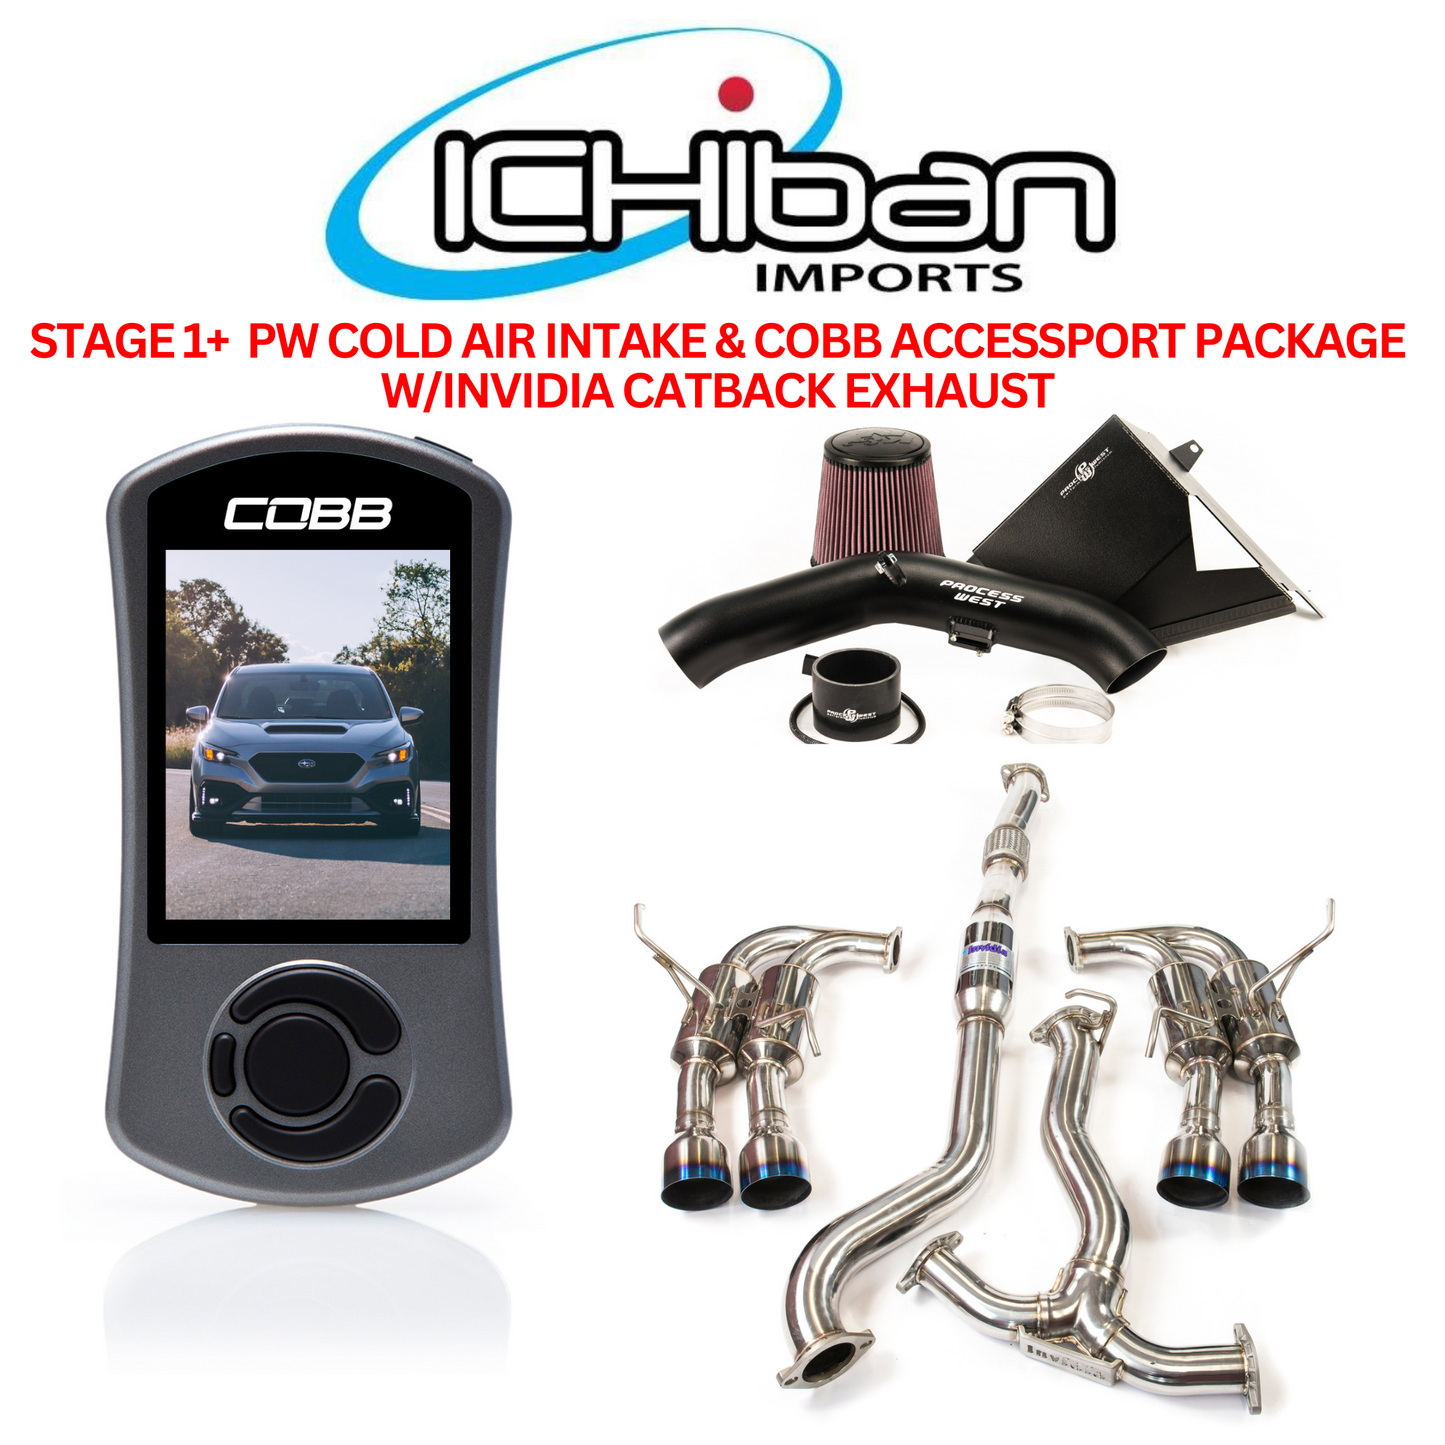 Ichiban Imports - Stage 1+ Process West & Cobb Tuning Power Package W/ Invidia Catback Exhaust (WRX VB 22+) (Manual)